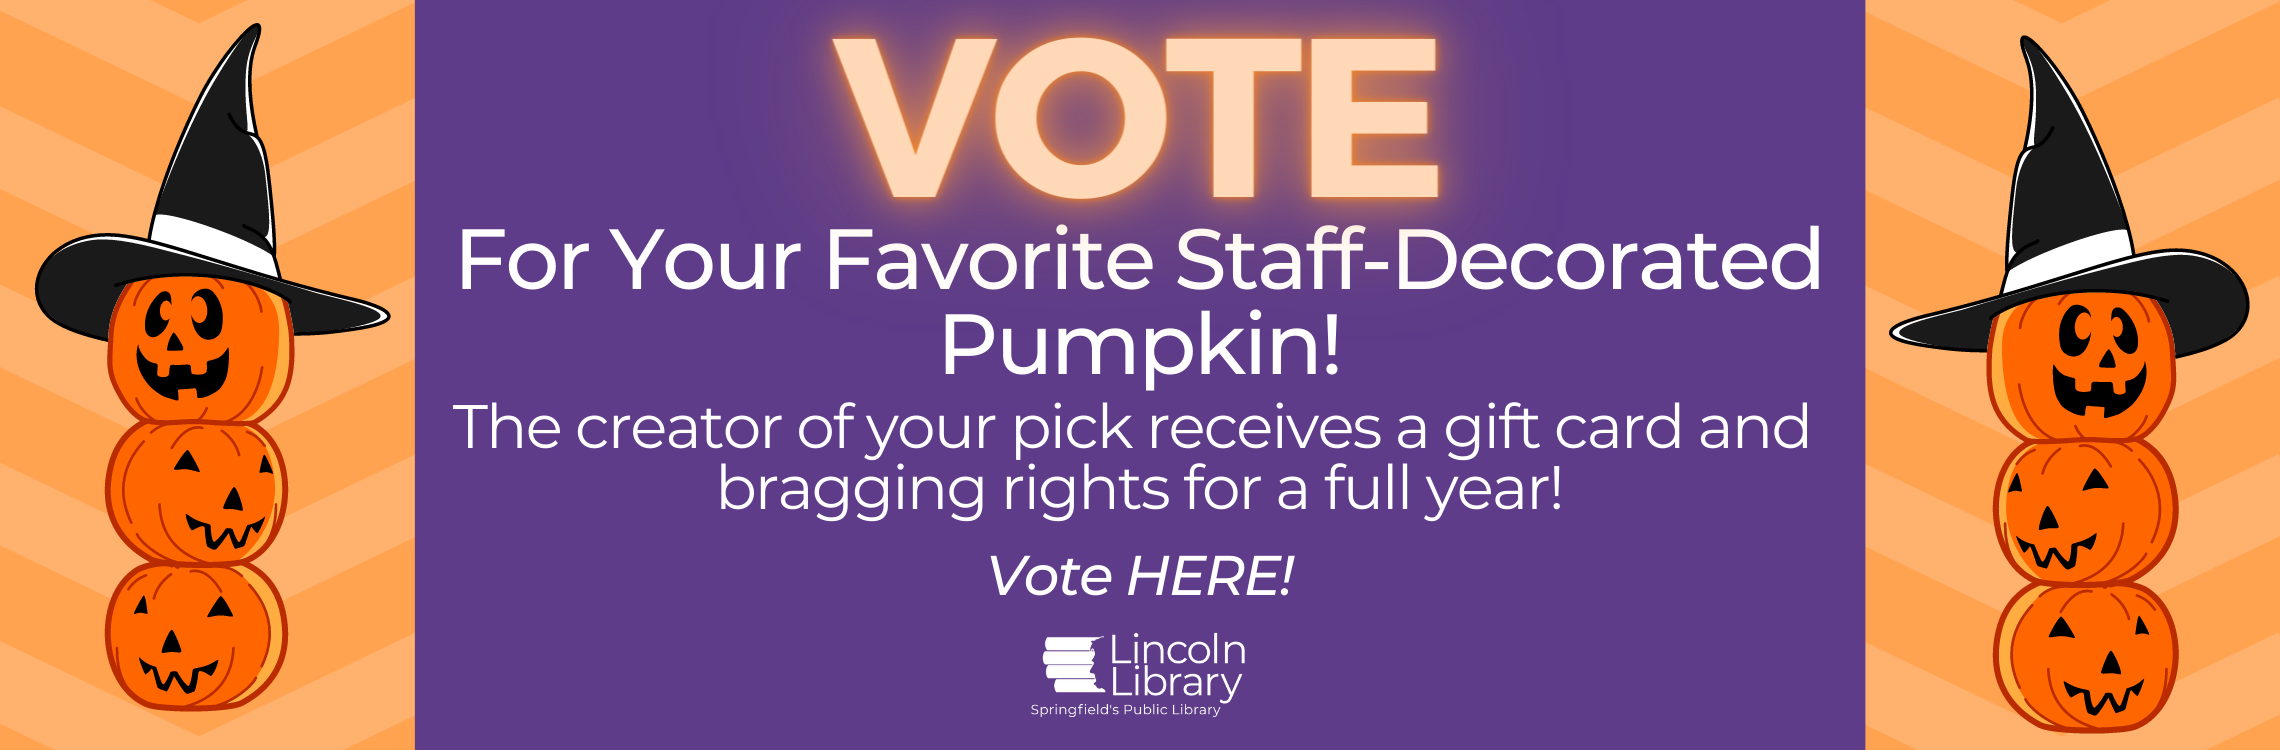 Vote in the staff pumpkin contest by clicking here